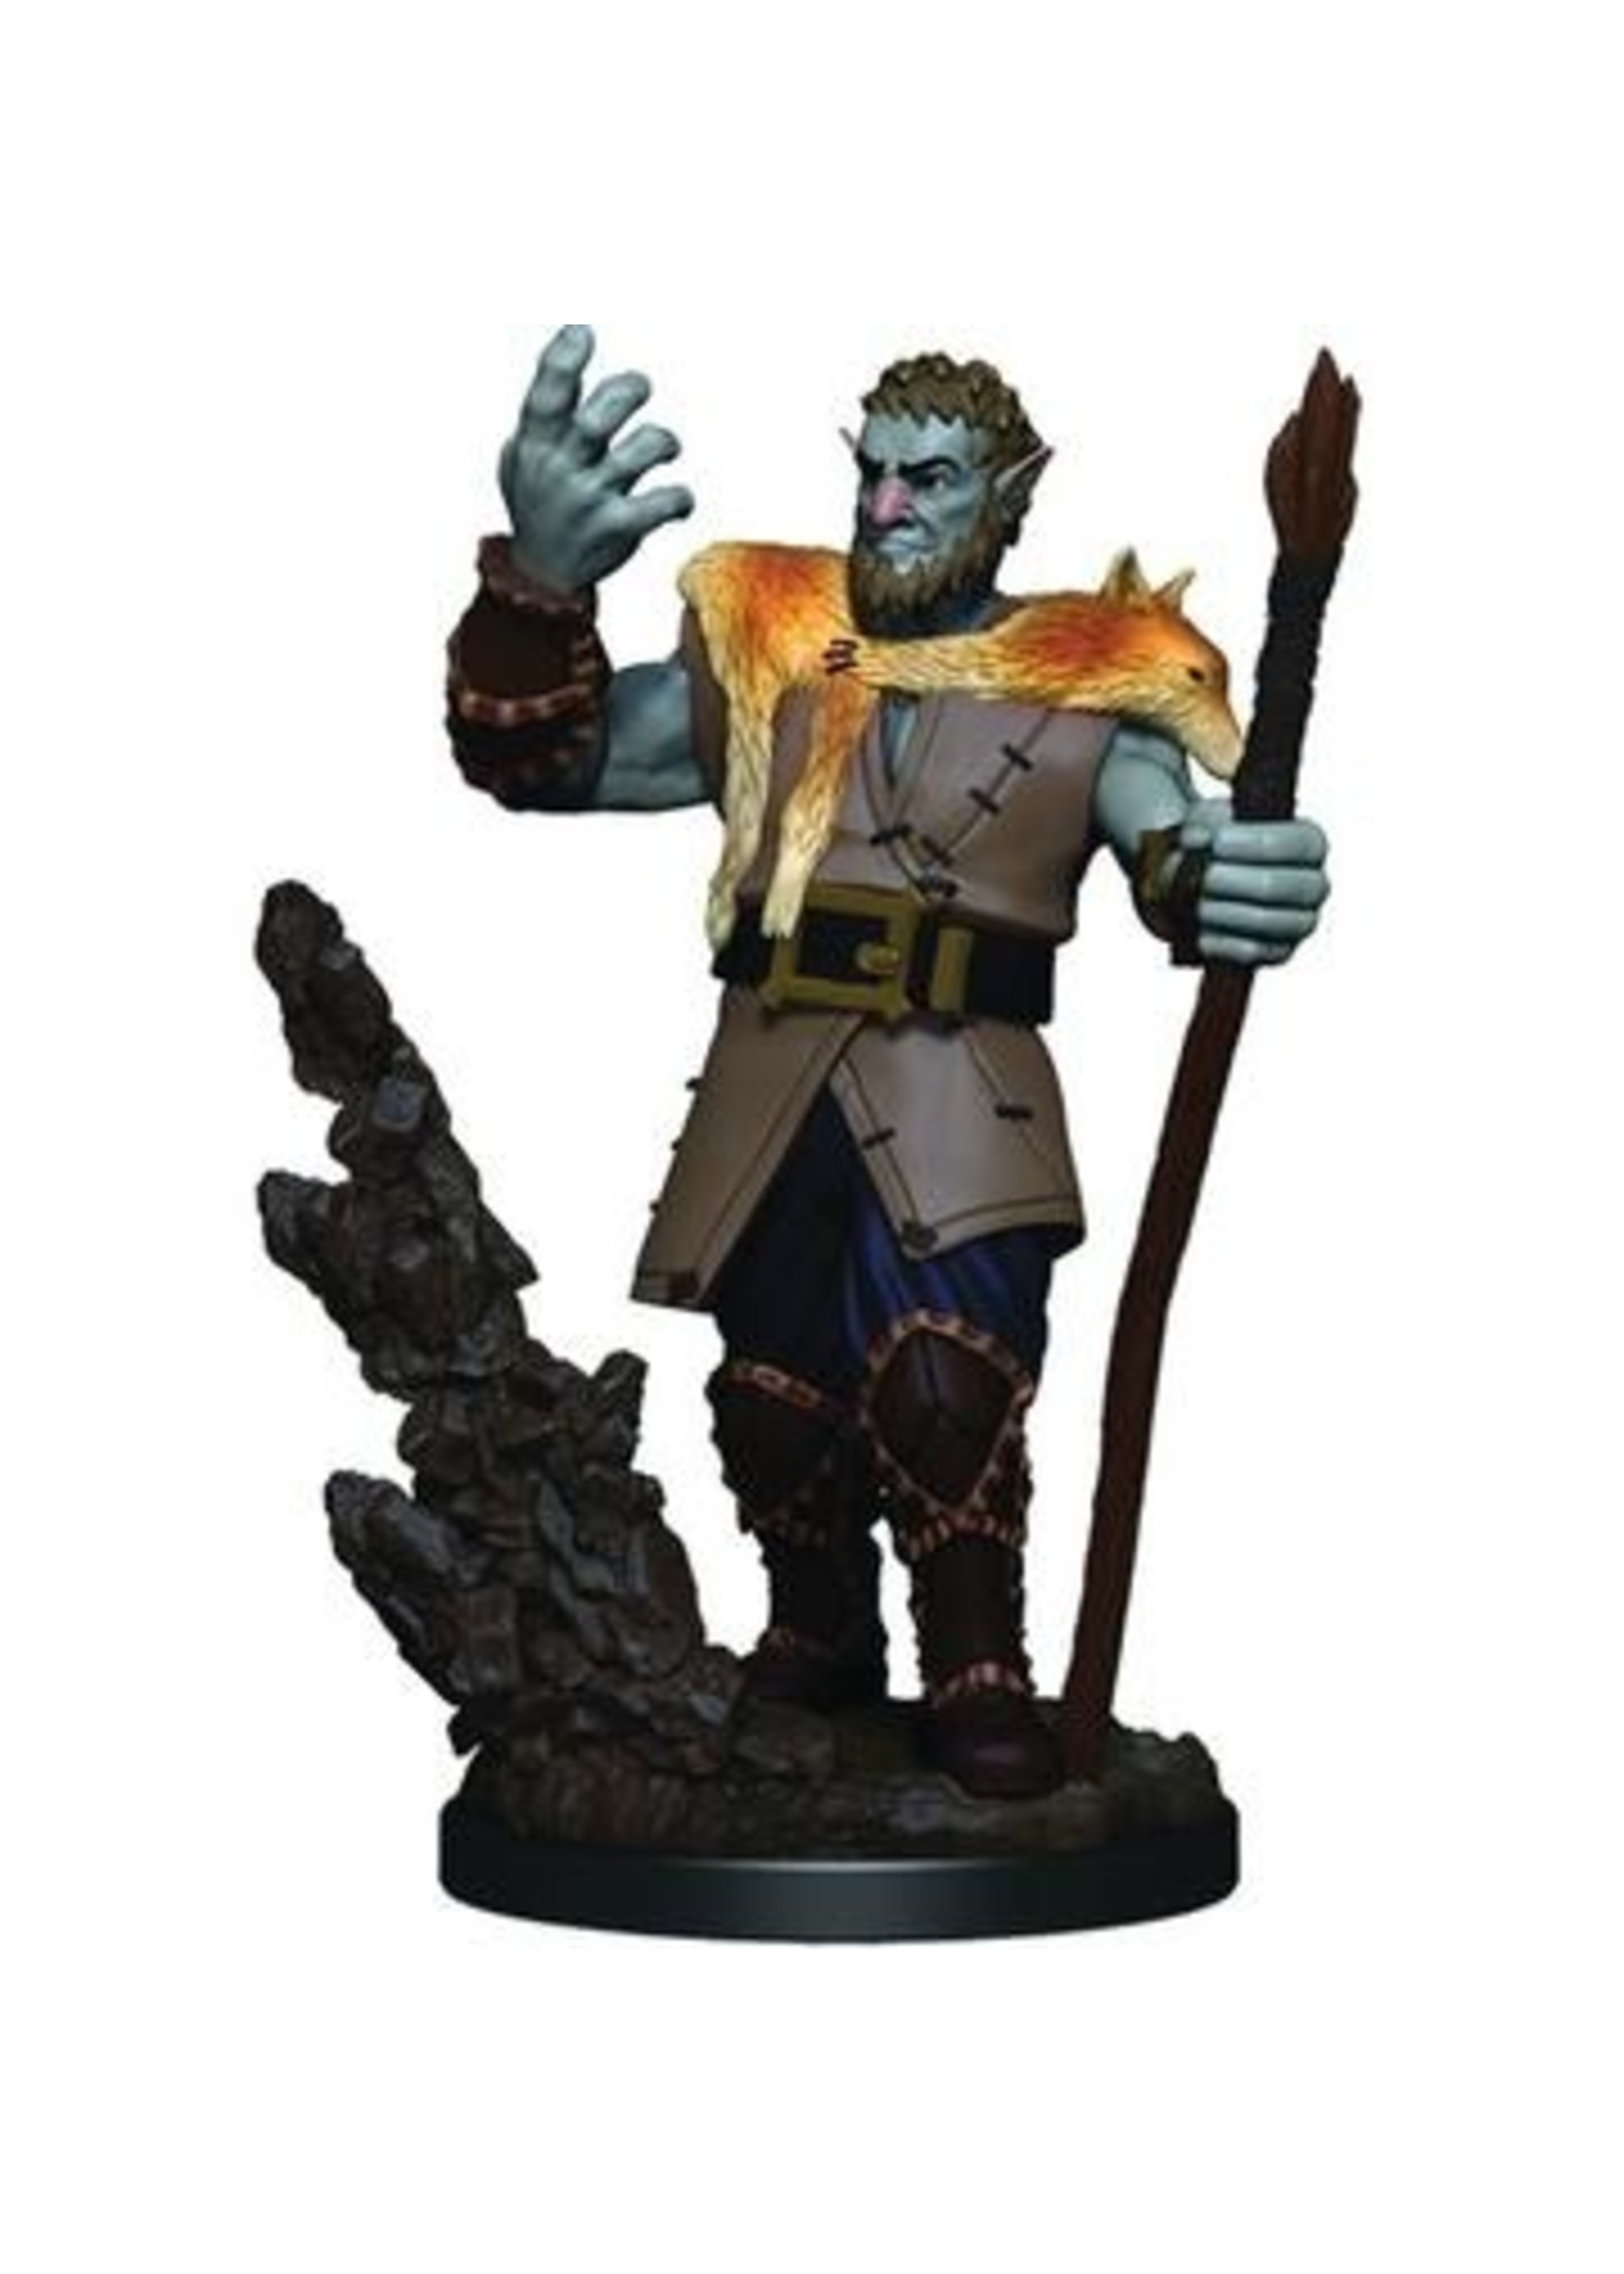 Dungeons & Dragons 5e D&D IOTR Wave 3 Firbolg Male Druid